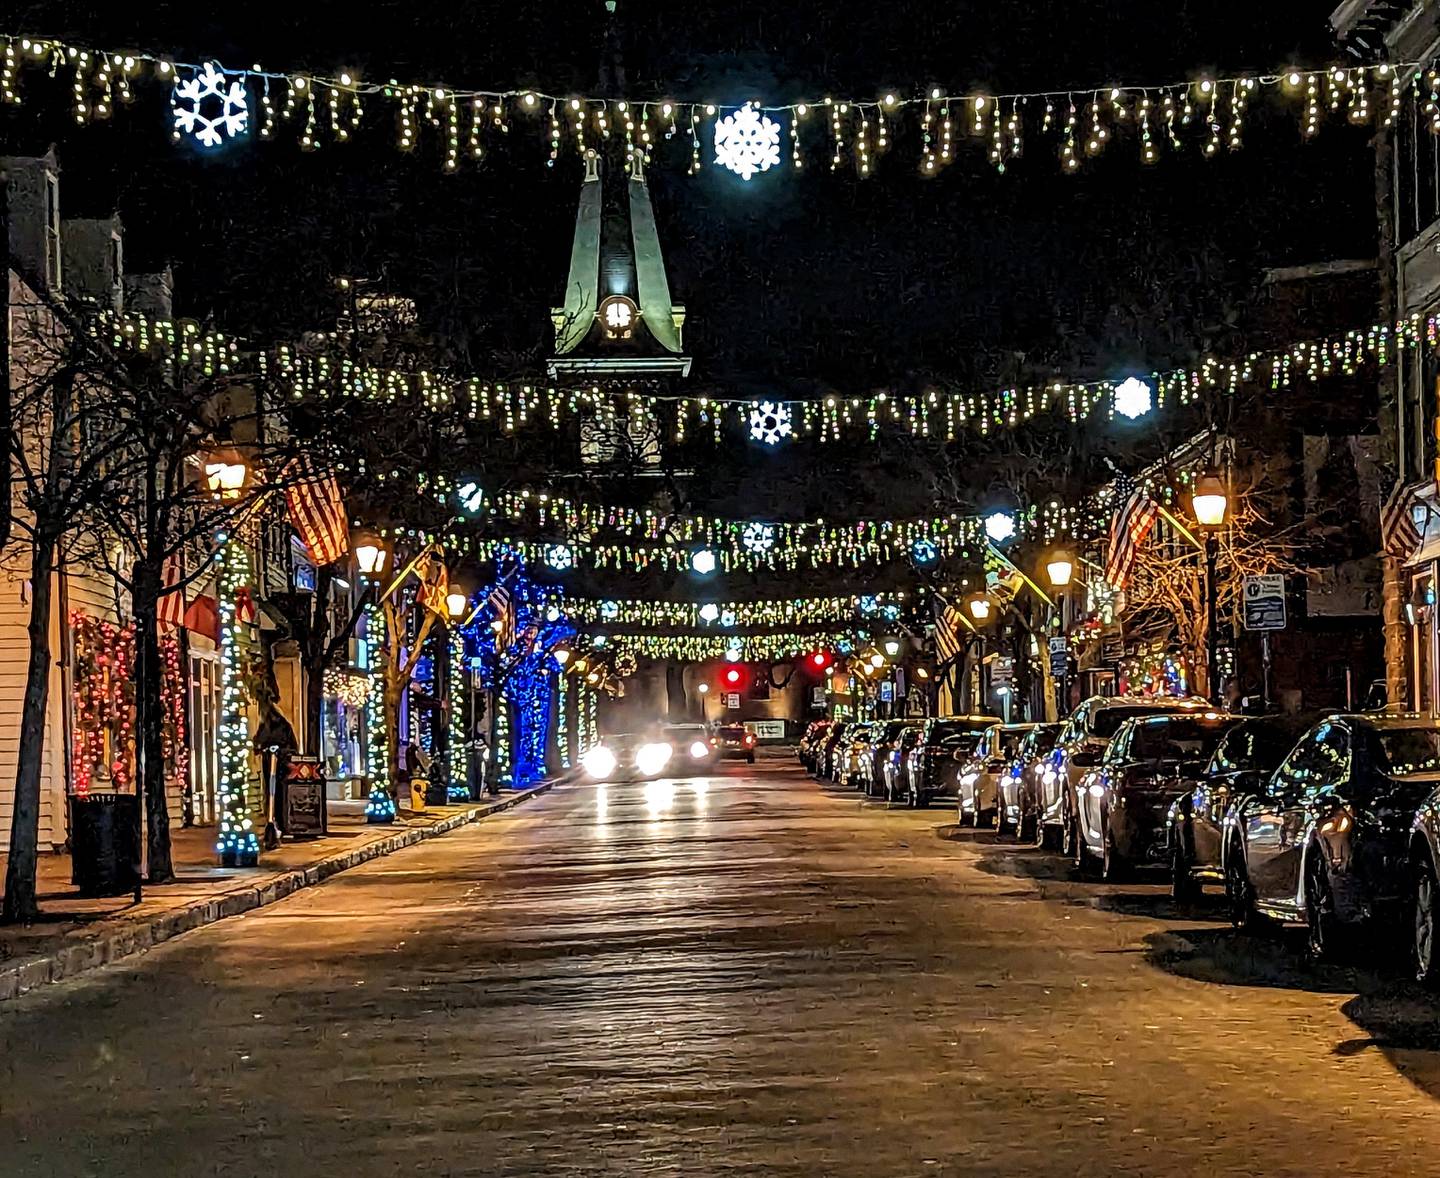 Annapolis has several holiday street festivals, including the Chocolate Binge Festival and the Artisan's market on inner West Street.